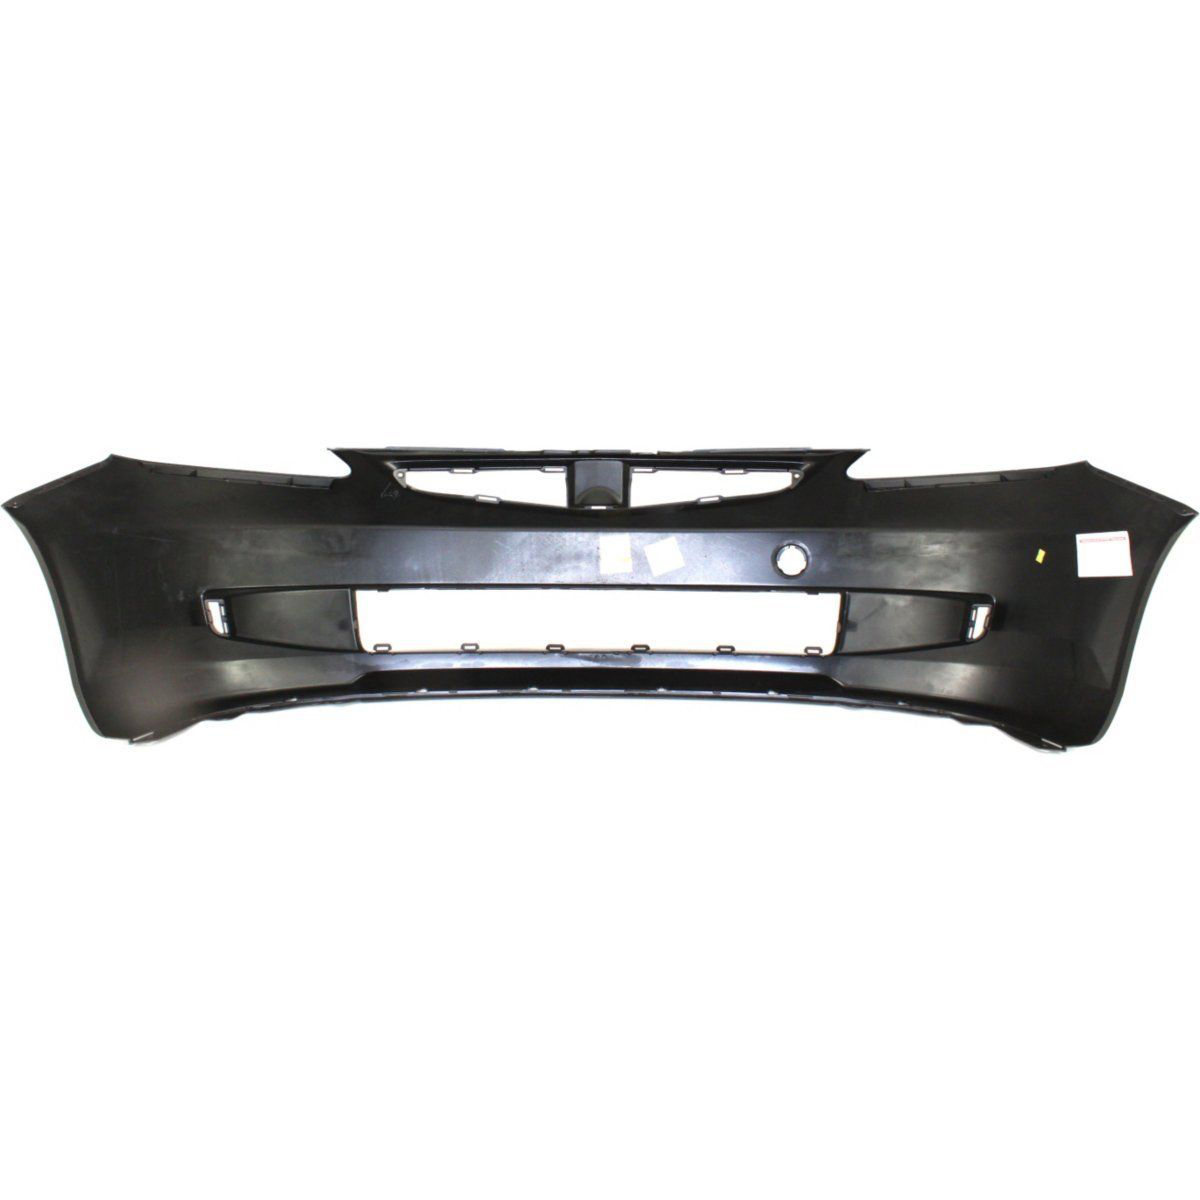 2007-2008 HONDA FIT Front Bumper Cover base/DX/LX model Painted to Match